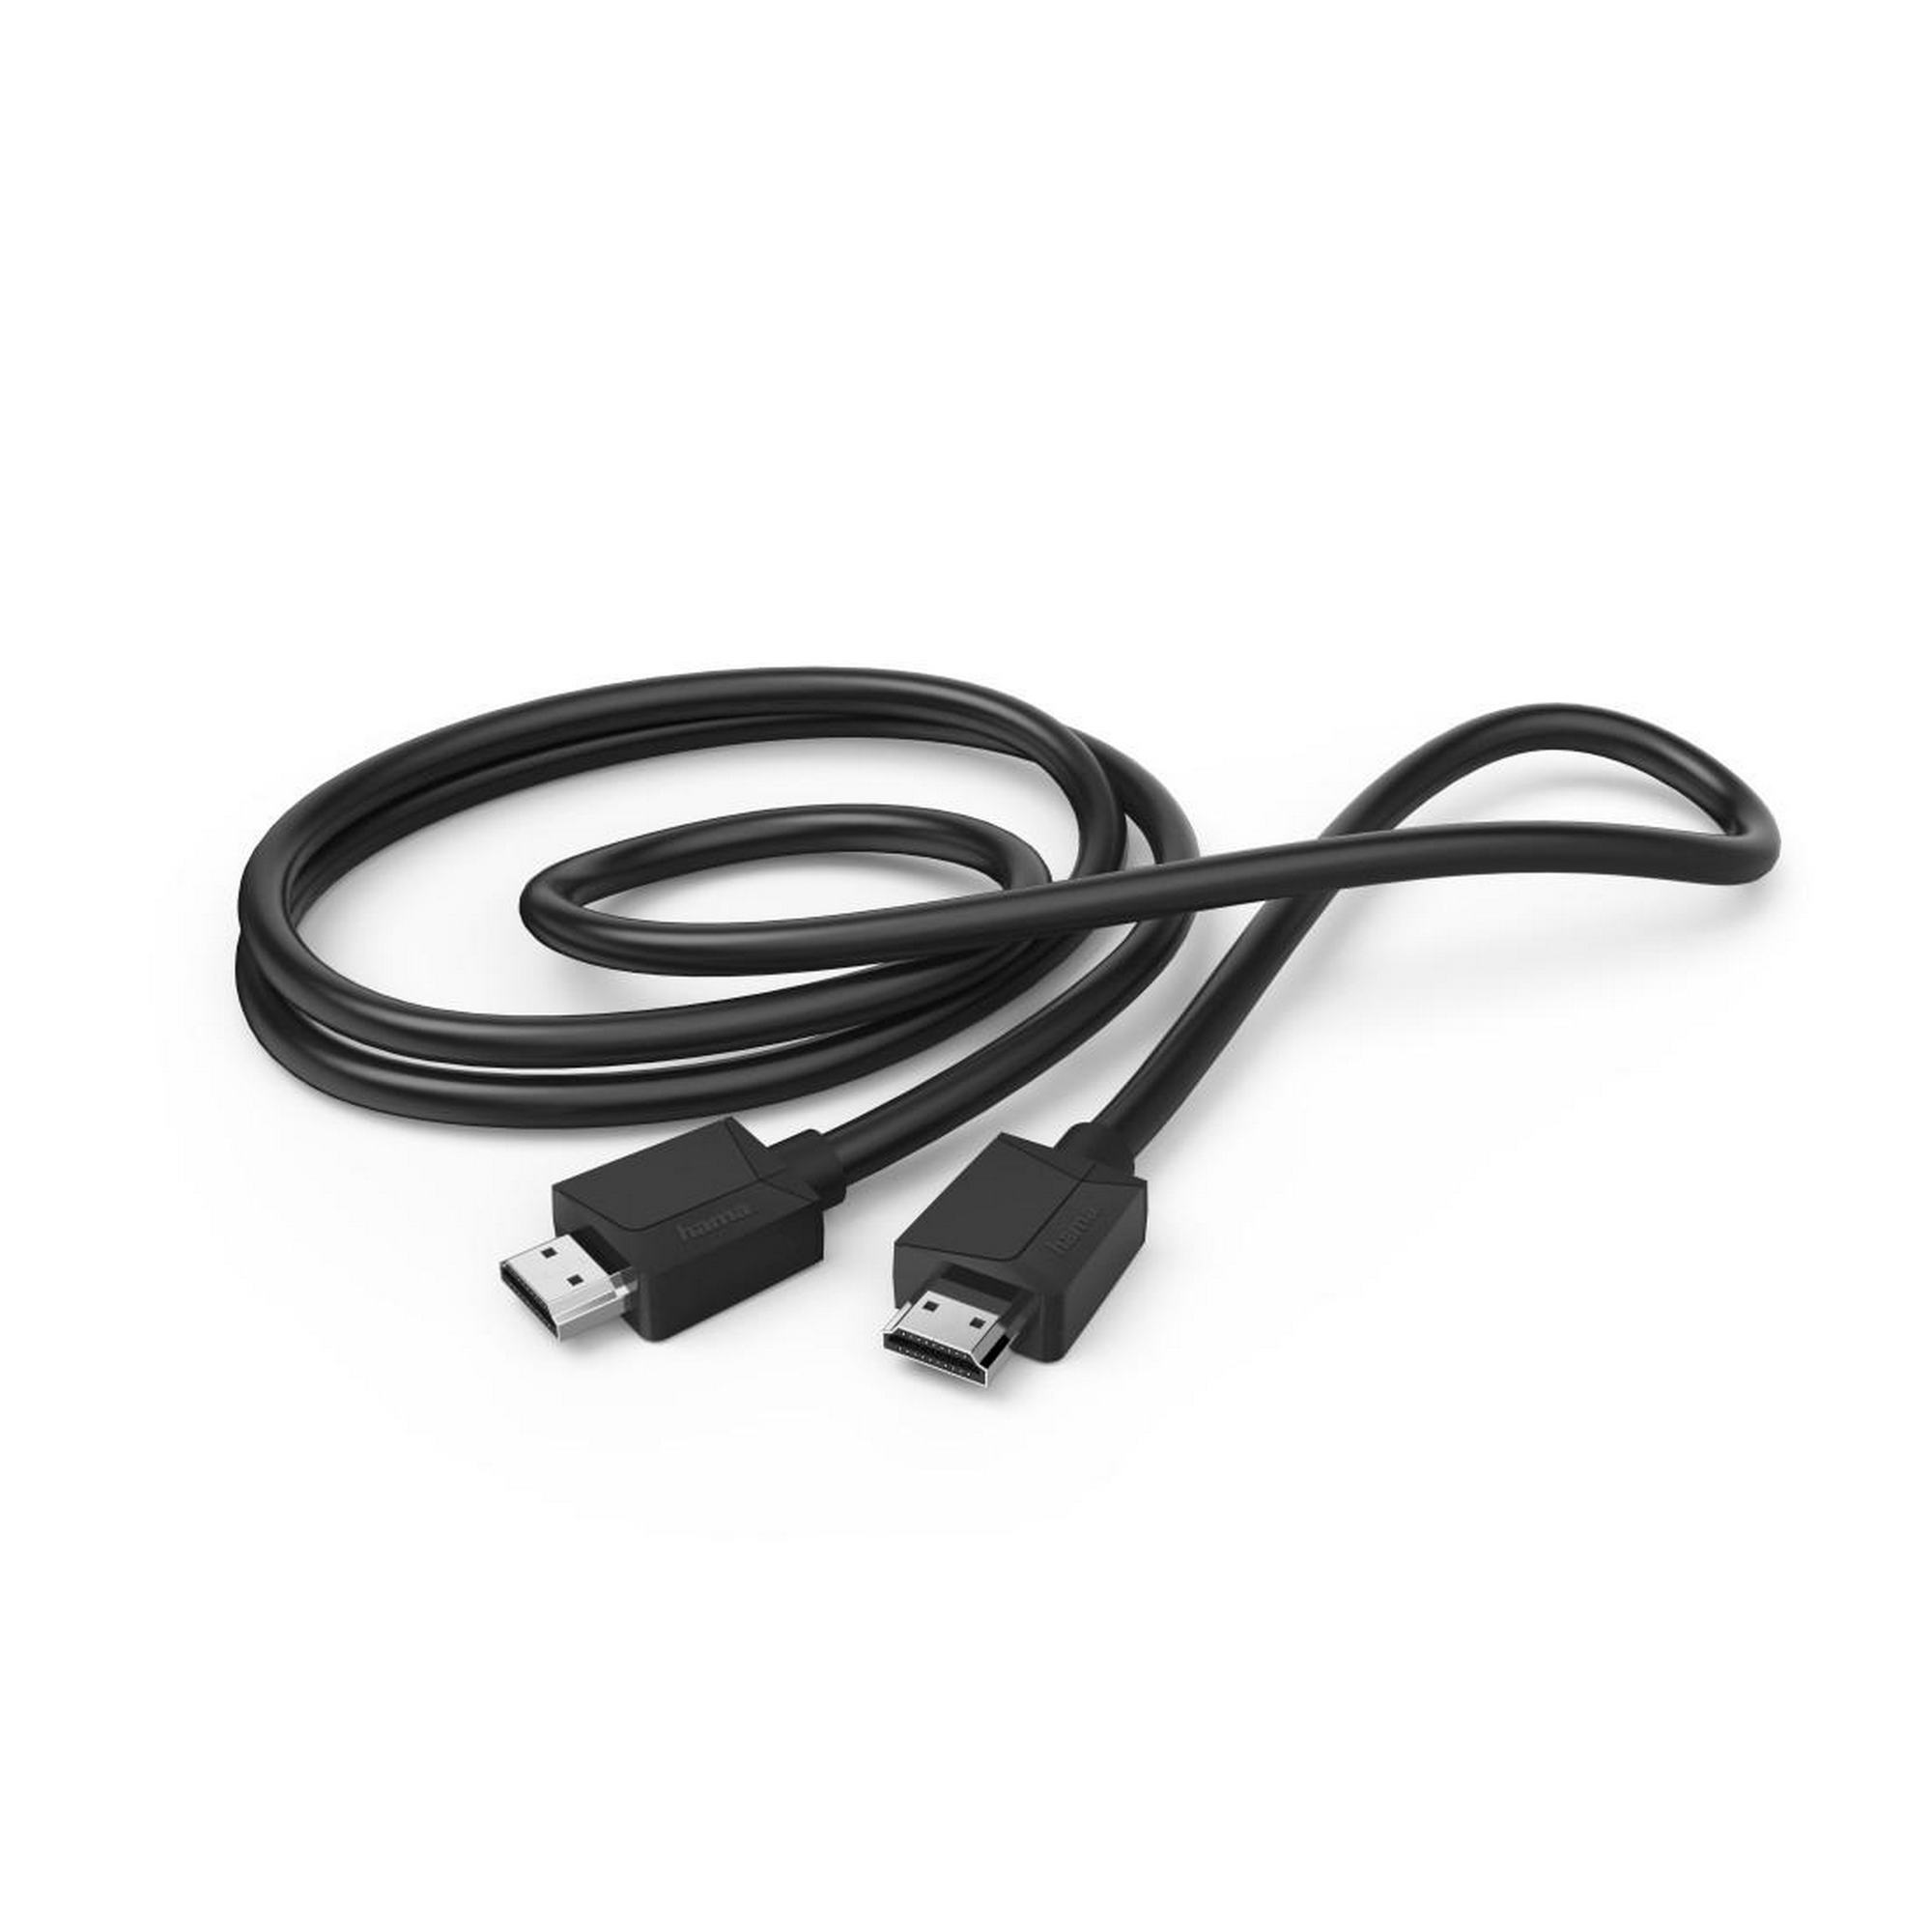 HDMI-Kabel 'Essential Line' High-Speed 4K Ethernet schwarz 3 m + product picture